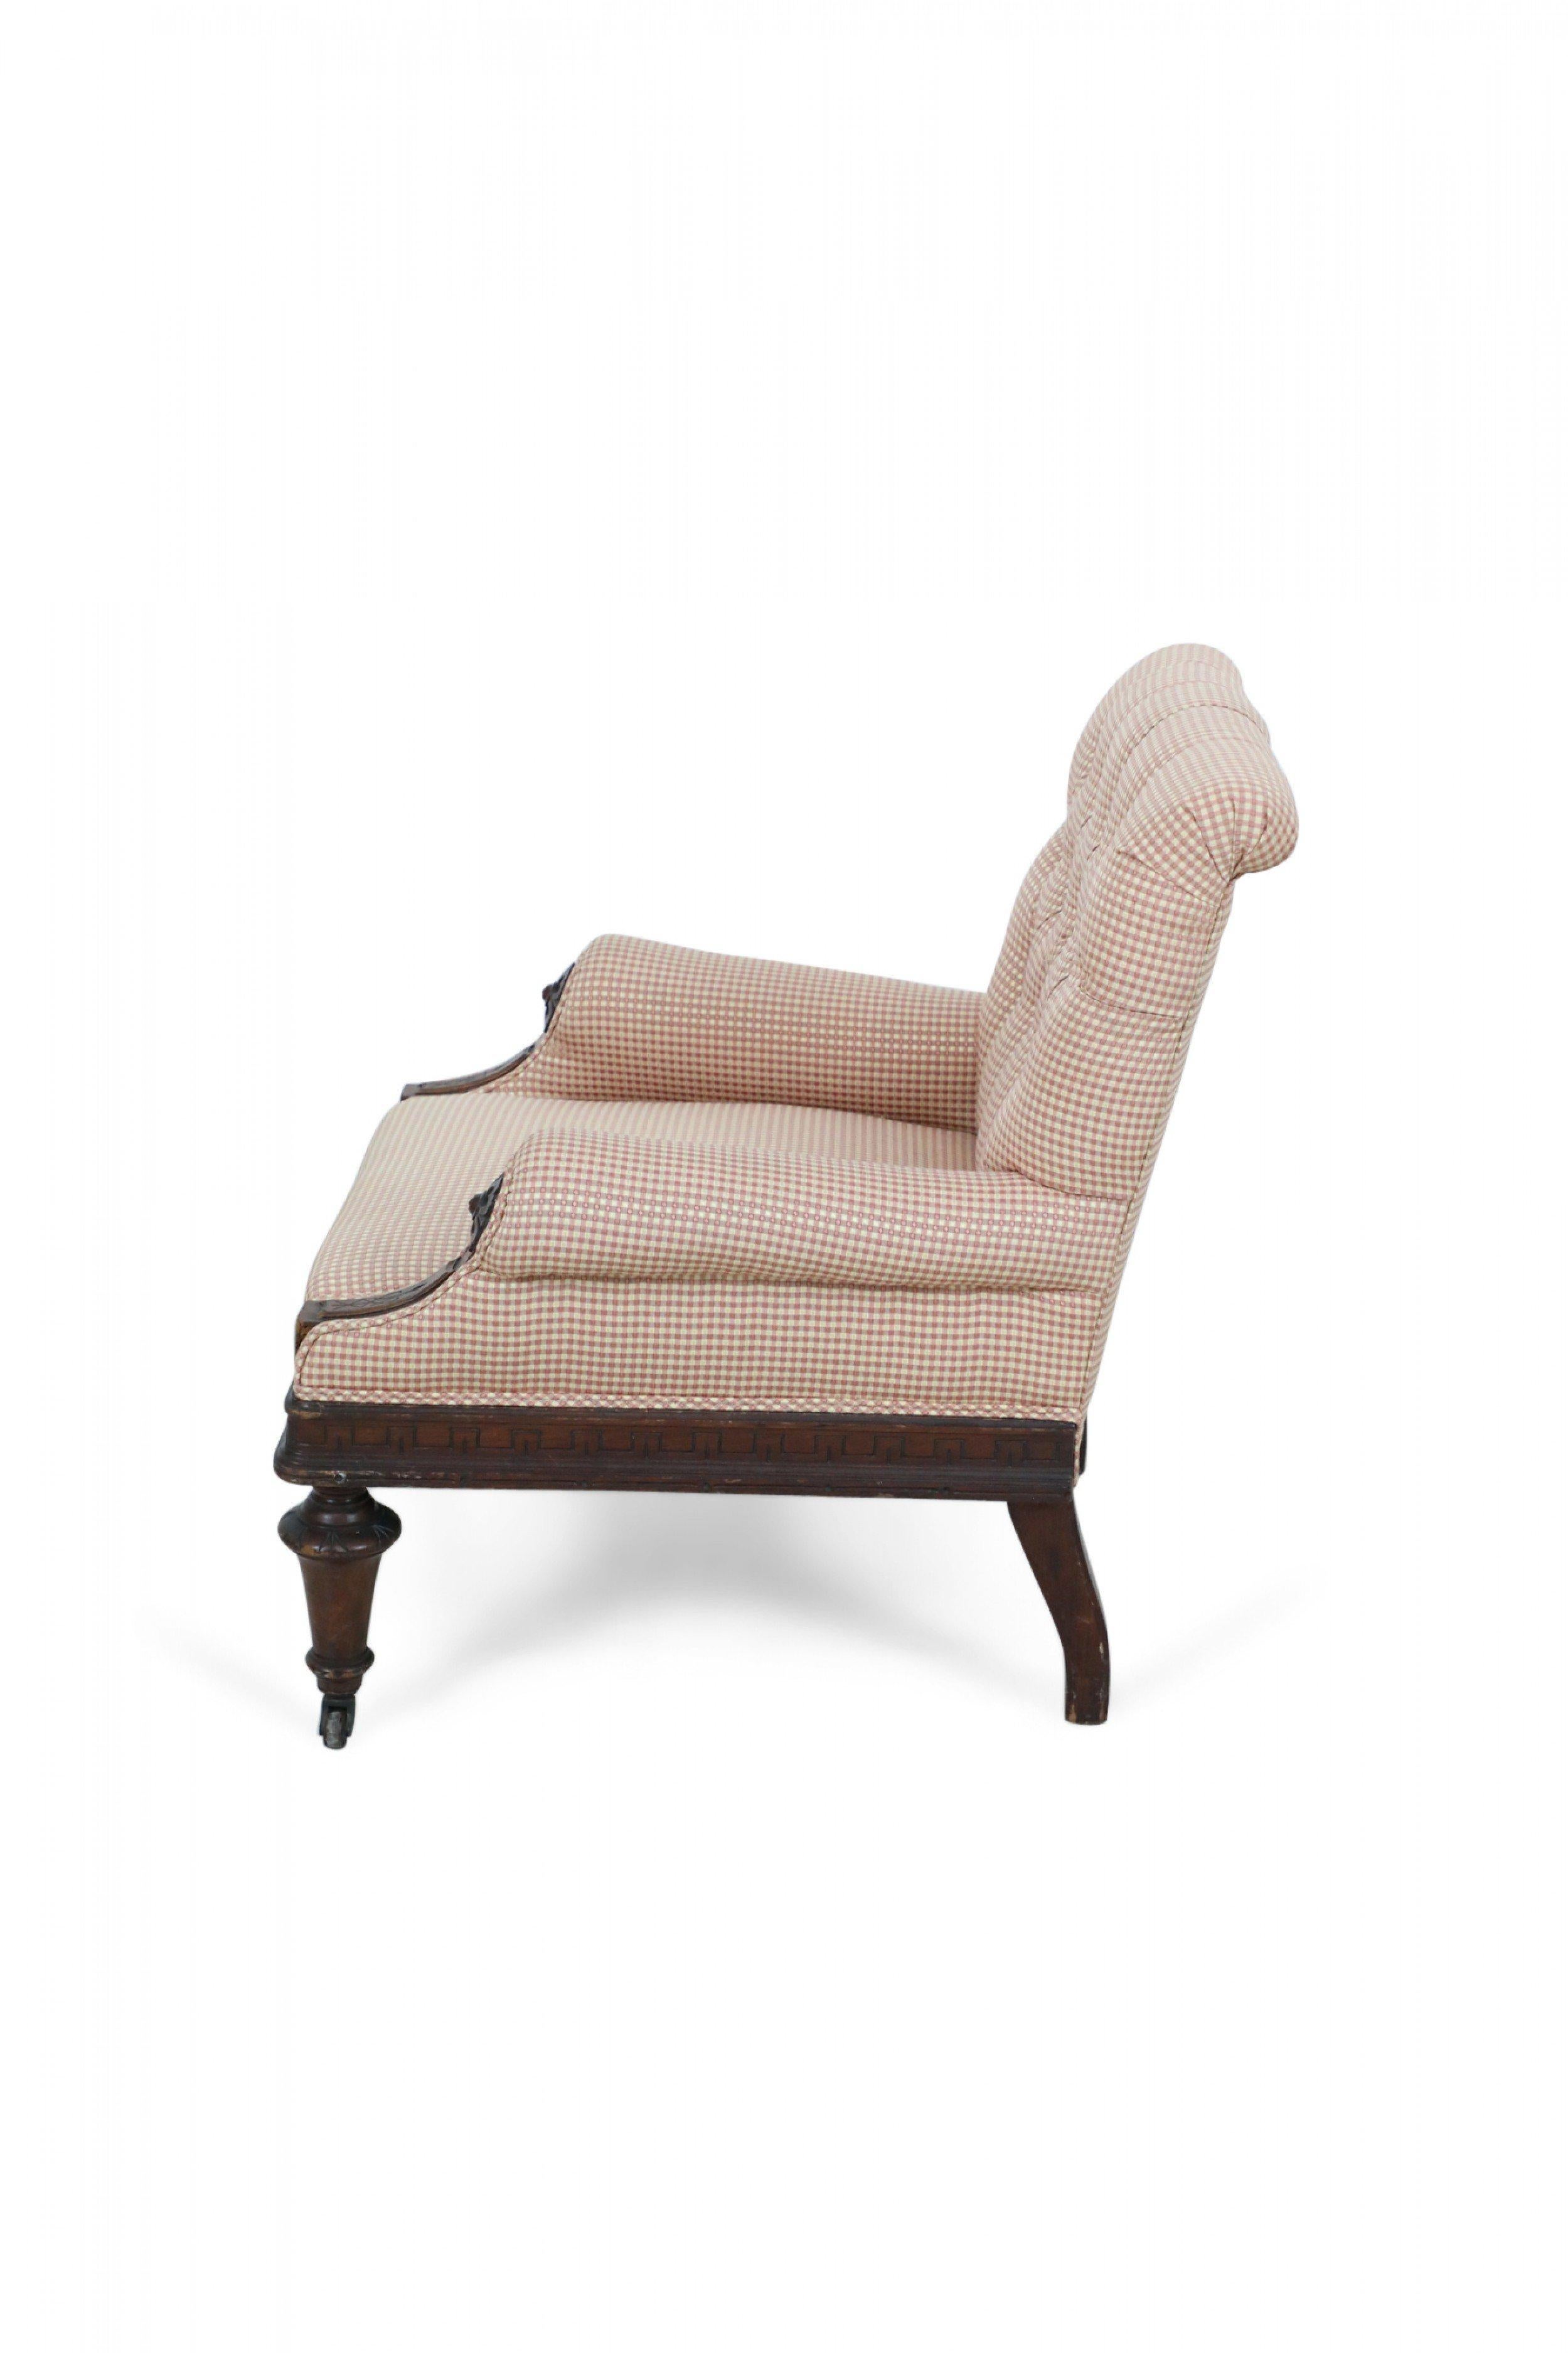 American Victorian Eastlake style armchair with burgundy and beige checkered upholstery with a button tufted roll back and a mahogany frame with carved detail including floral medallions on the arm fronts, resting on brass casters.